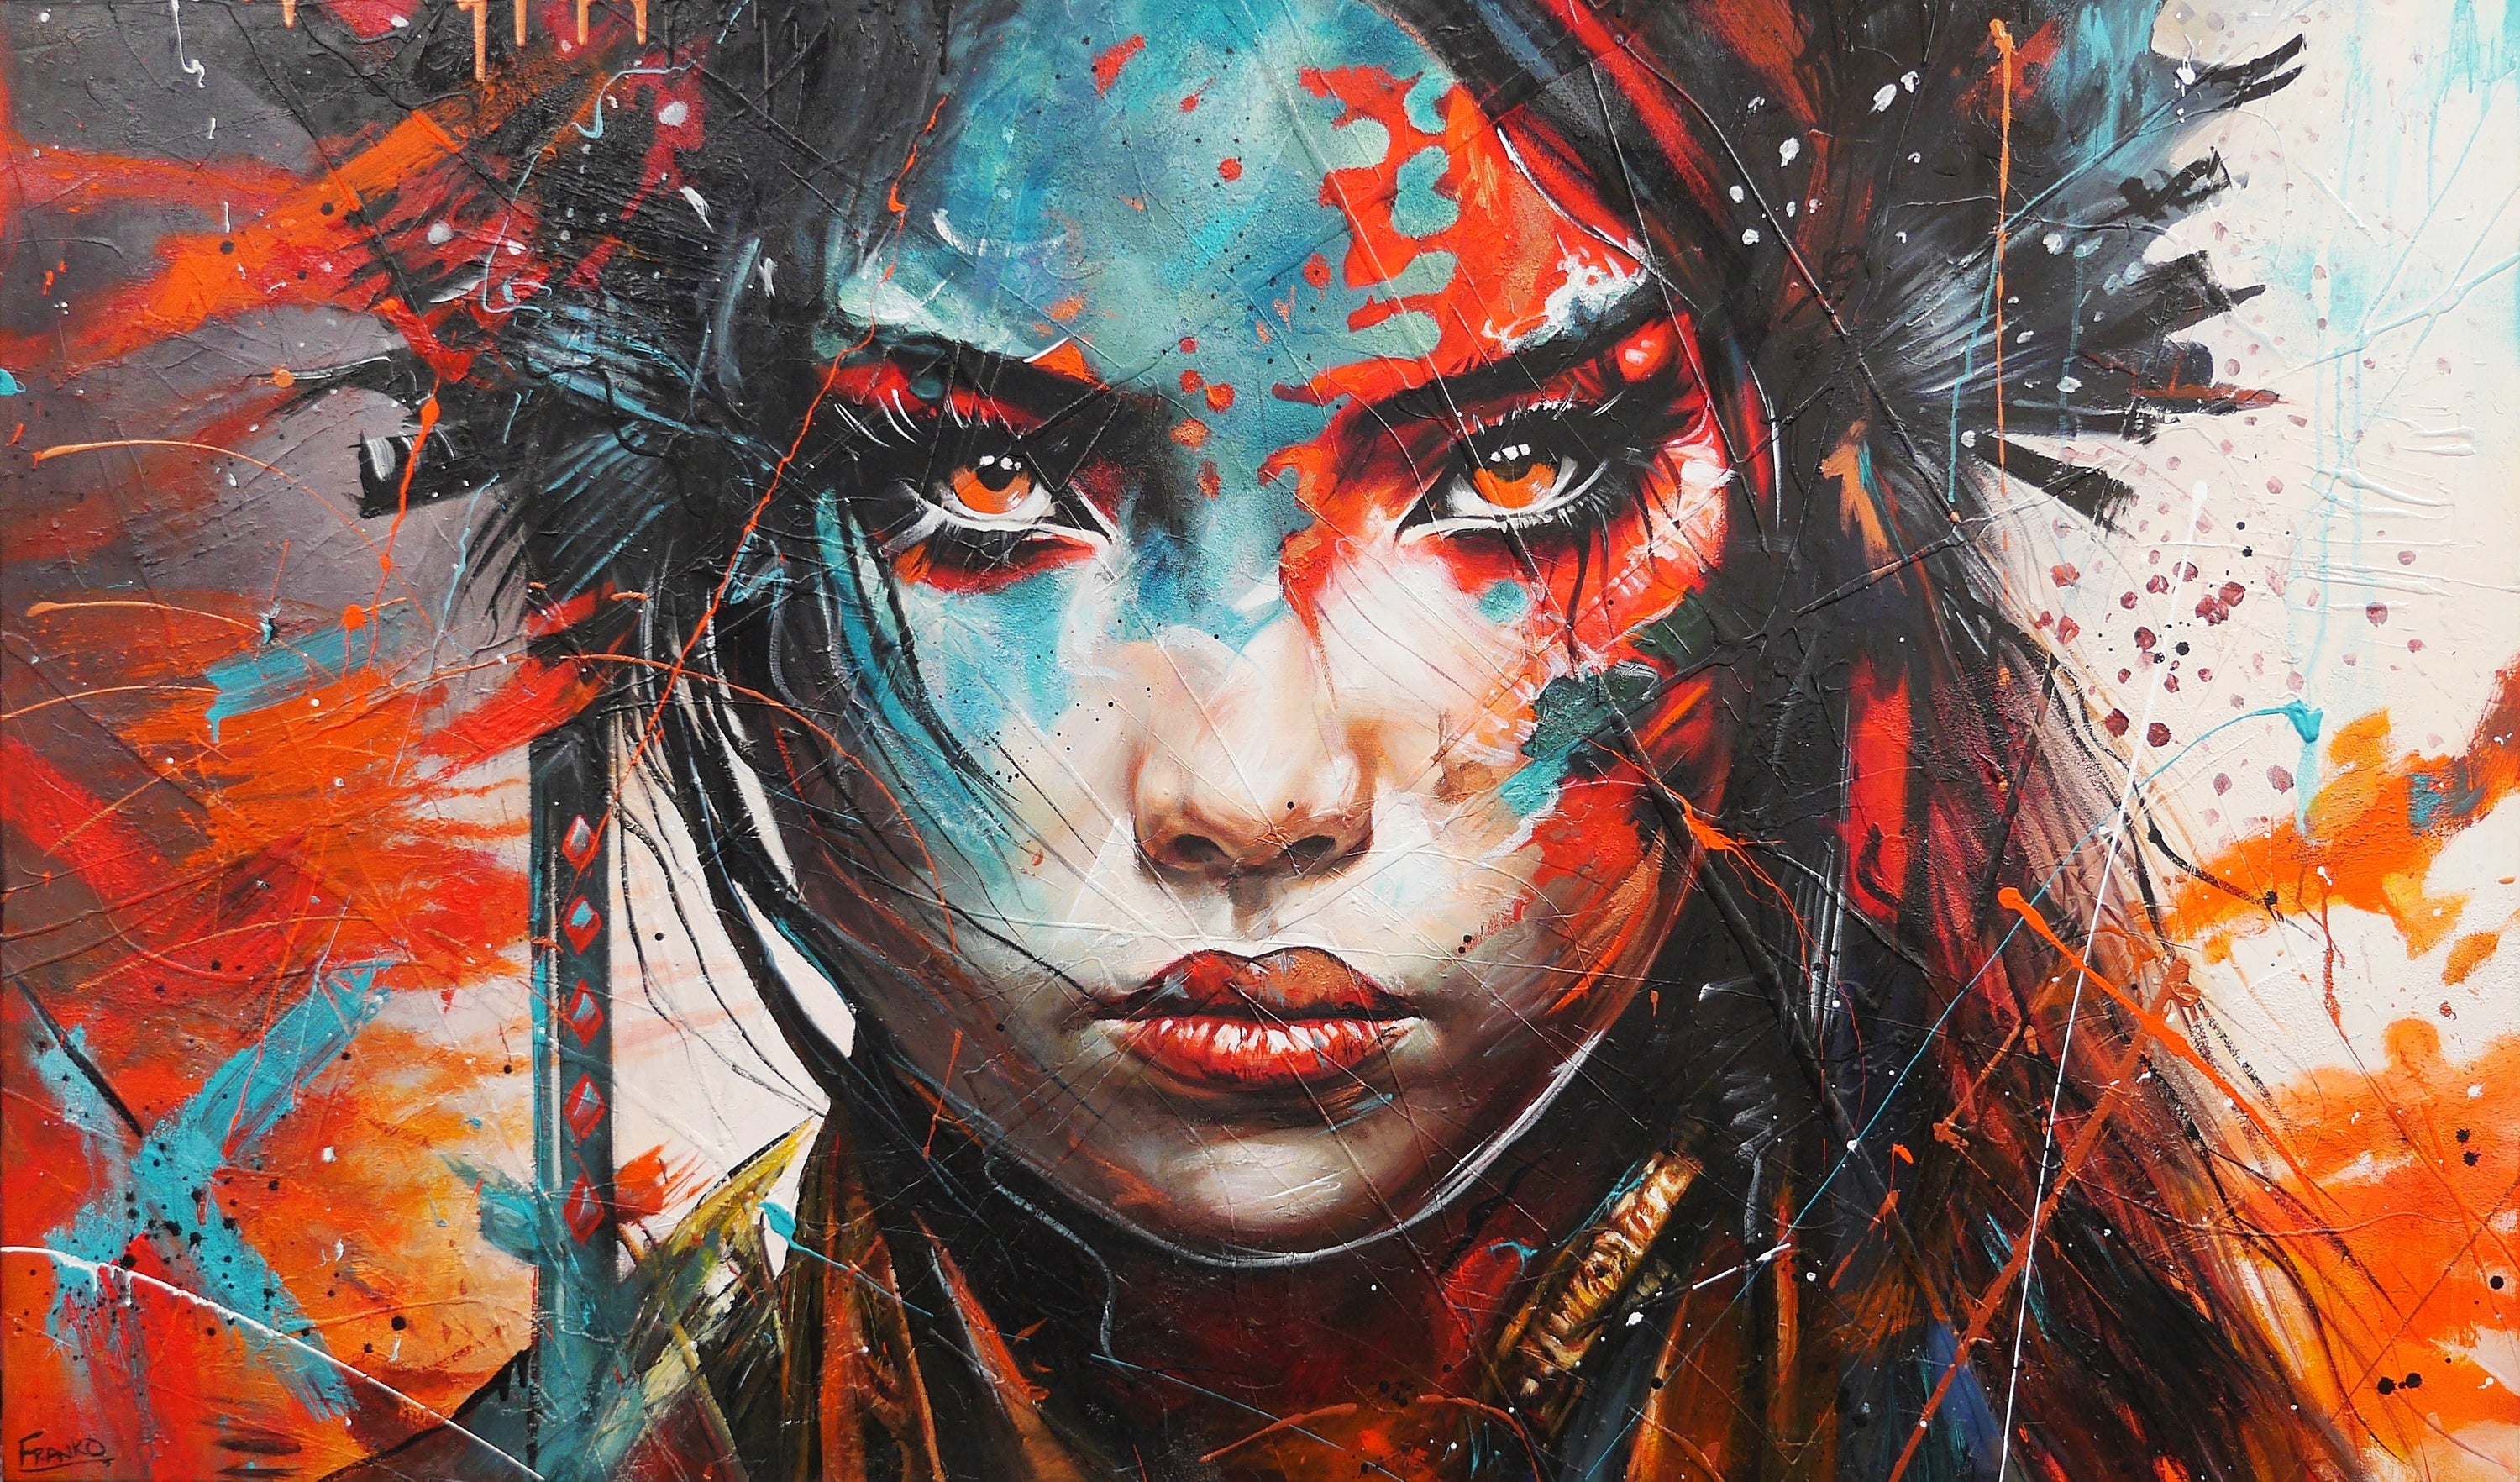 Hikaru 200cm x 120cm "Brave and Beautiful" Abstract Realism Framed Textured Painting